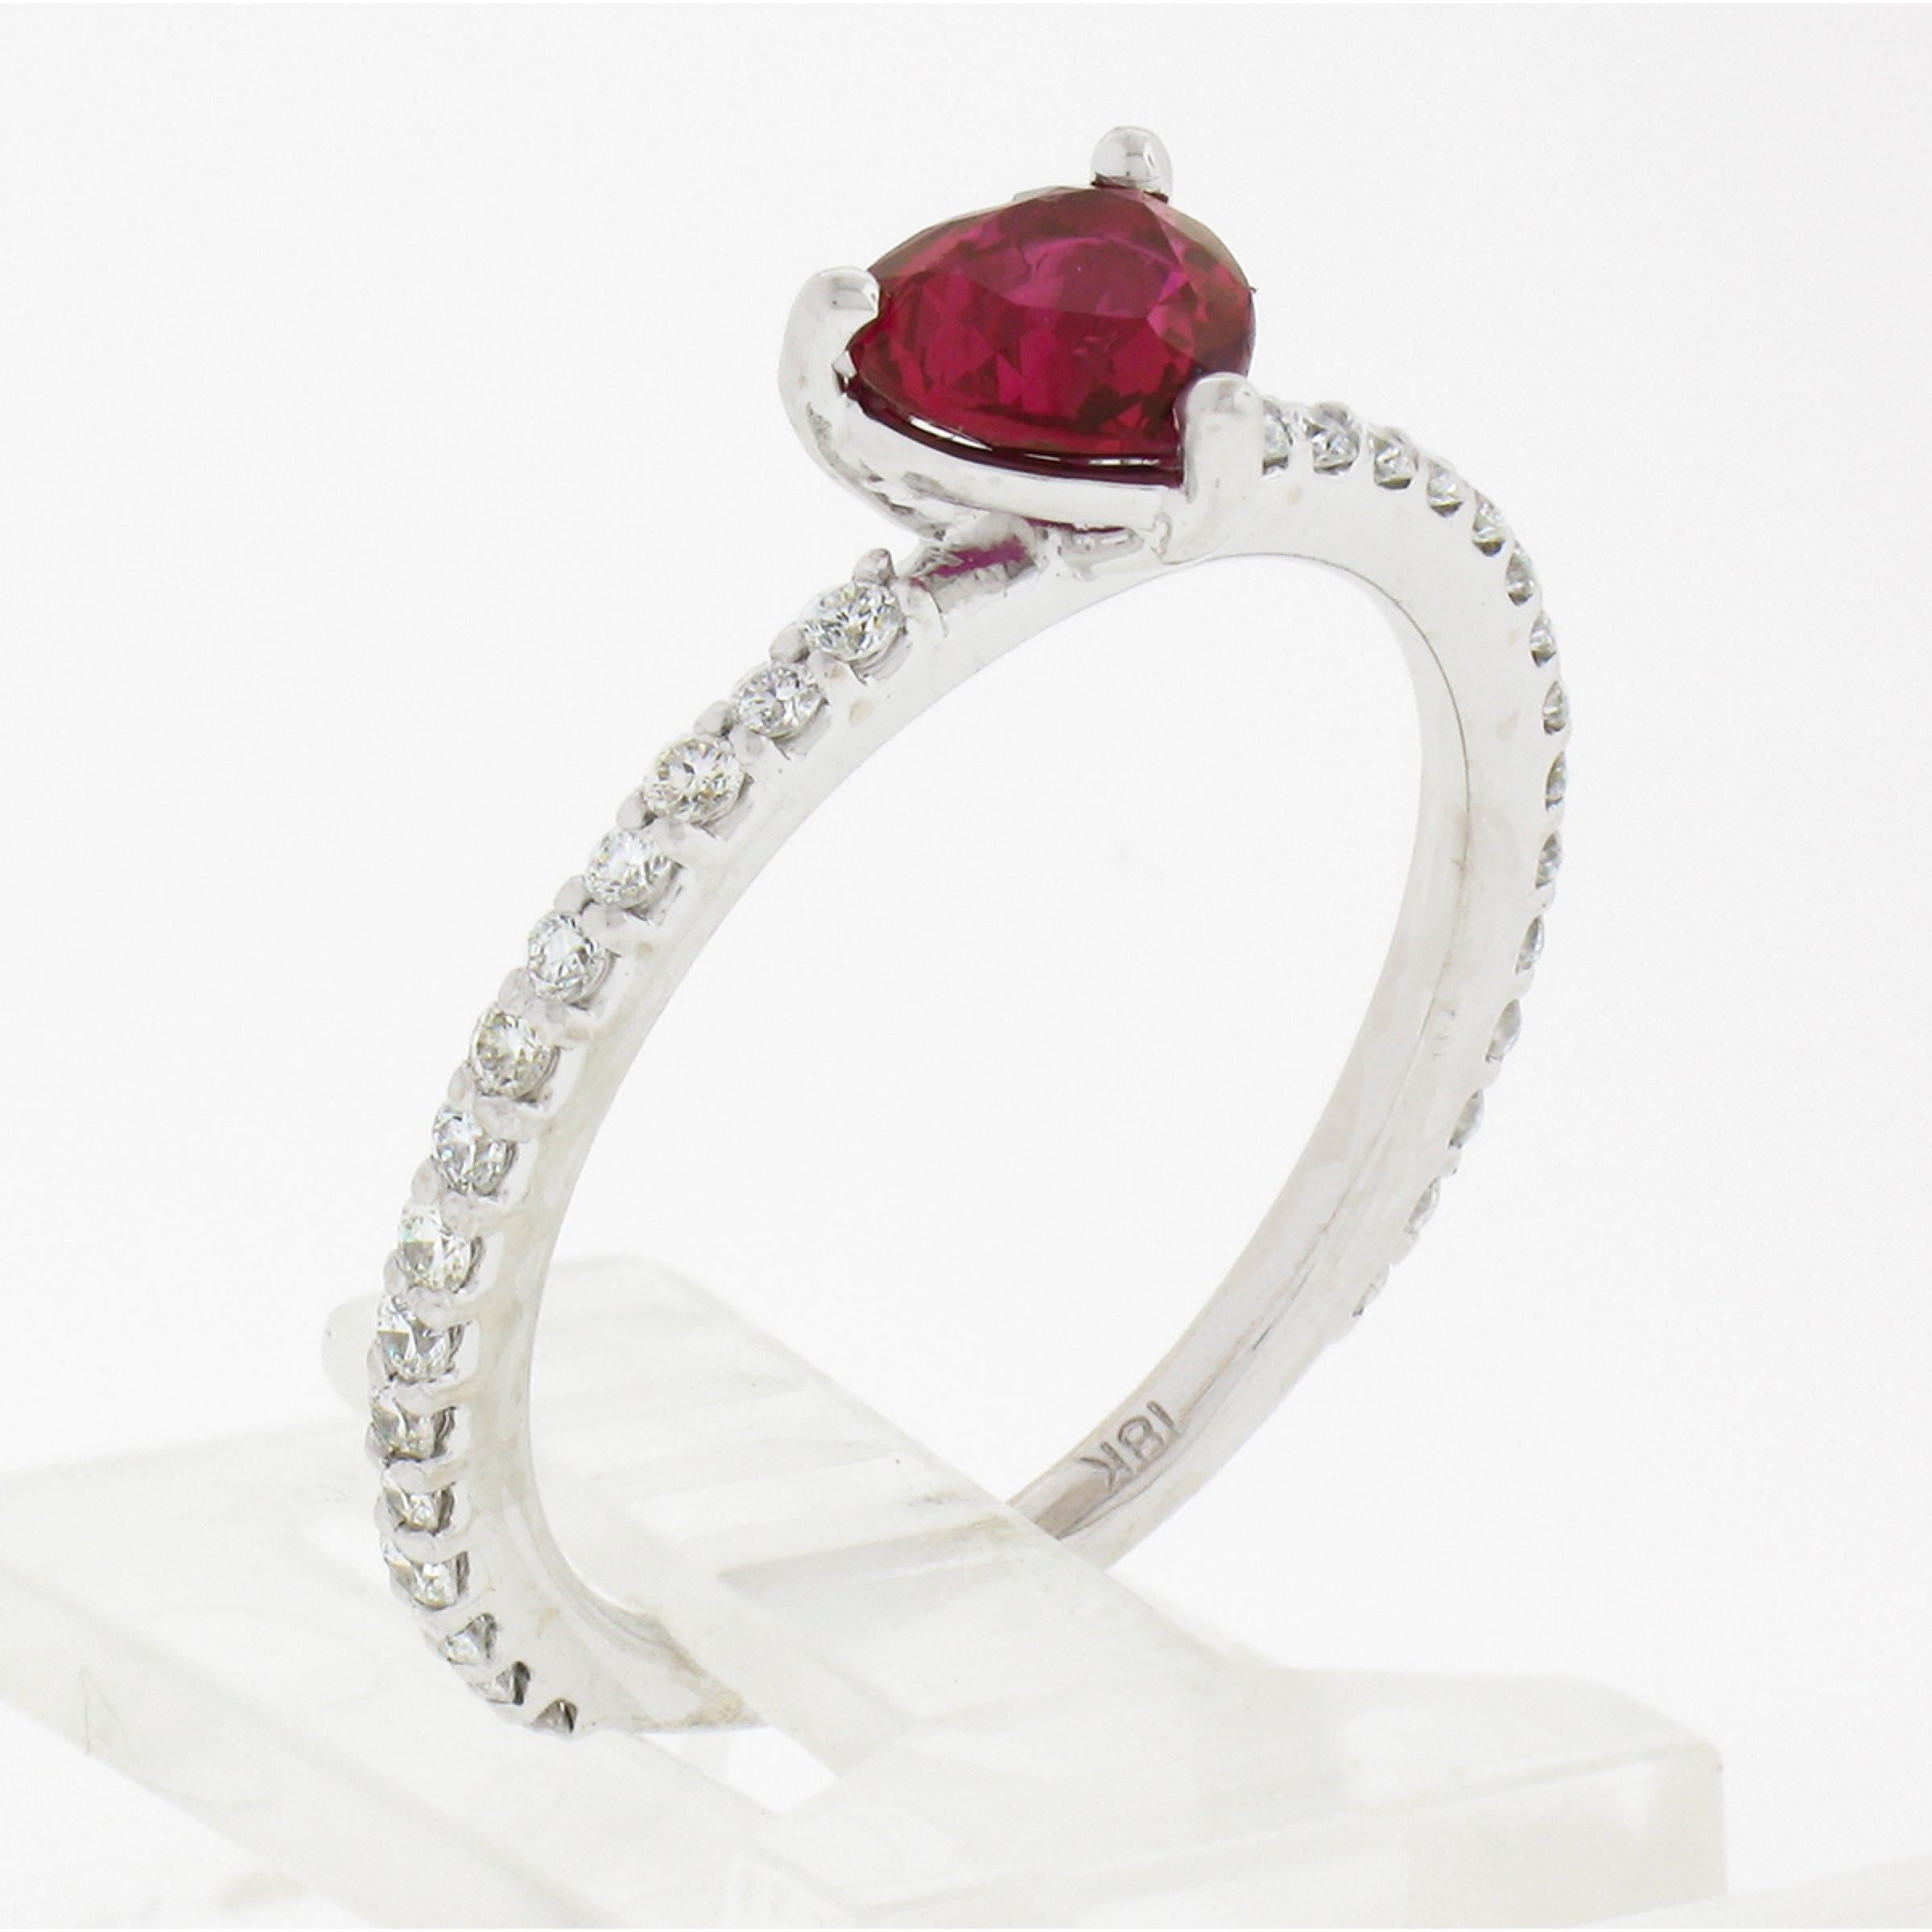 NEW 18k White Gold .95ct GIA NO HEAT Heart Ruby w/ Diamond Sides Engagement Ring 5